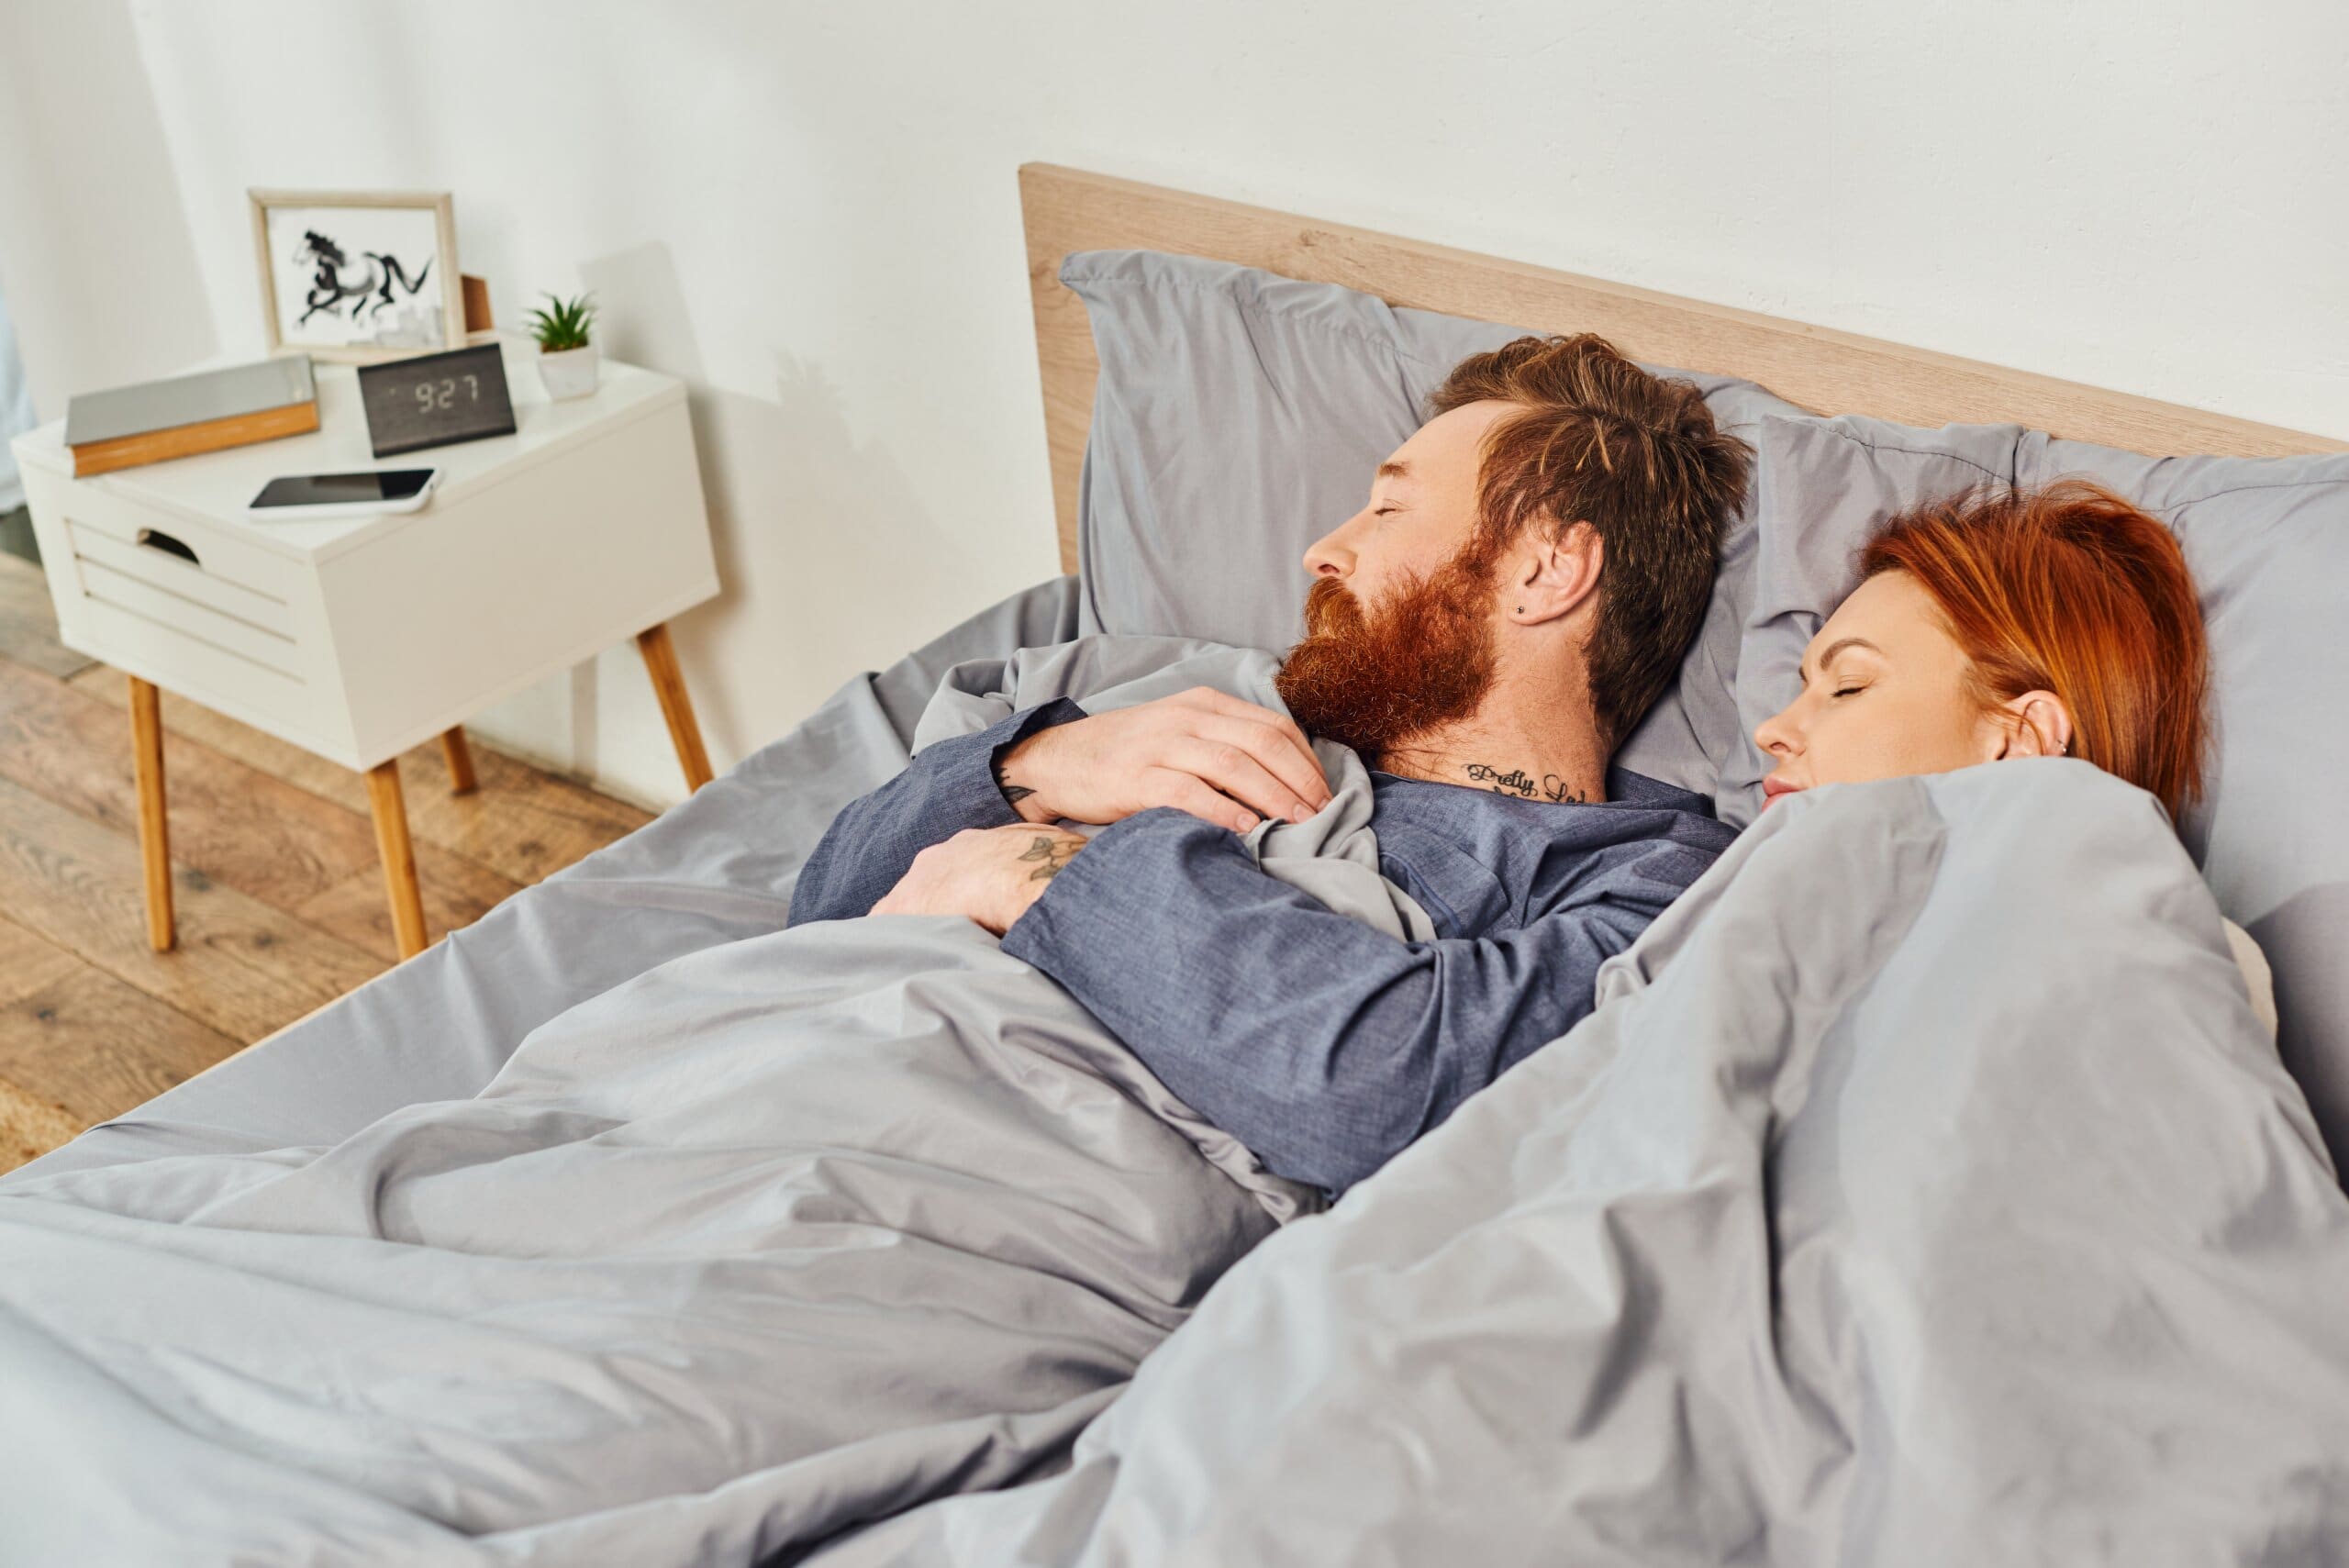 Couple asleep on their own sides of the bed next to the man's bedside table with his things on.